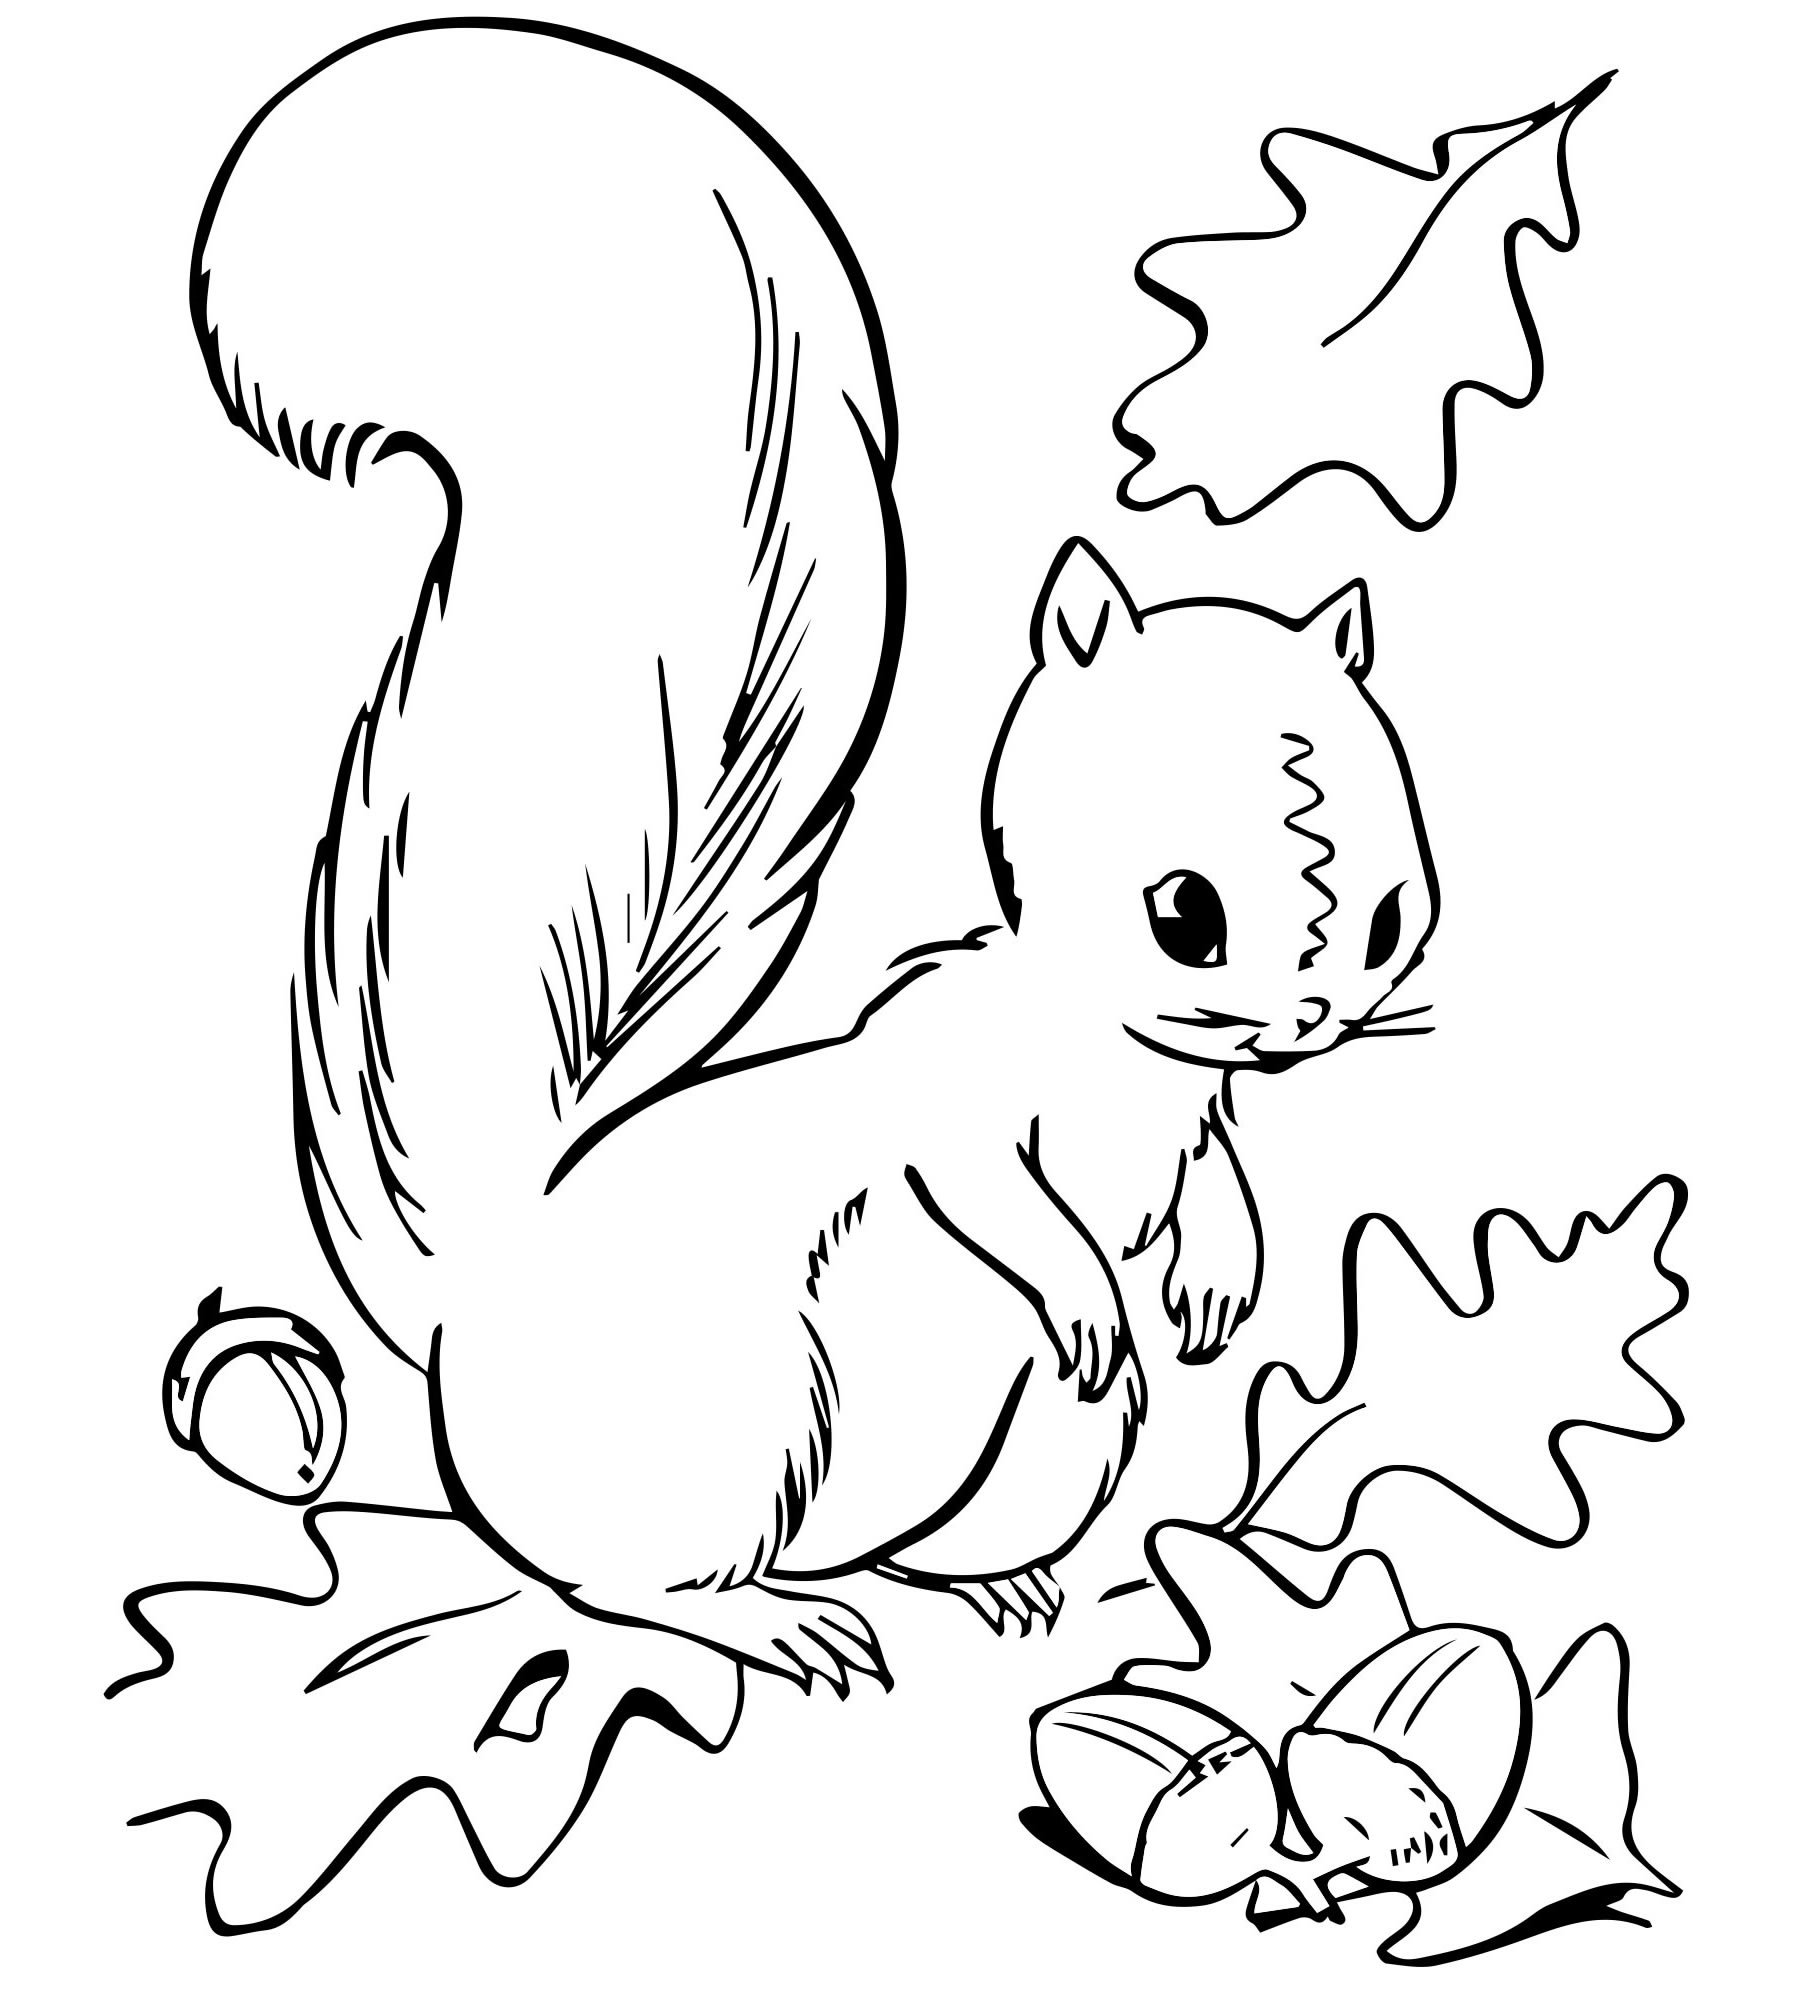 Squirrel for children 6 7 years old #6